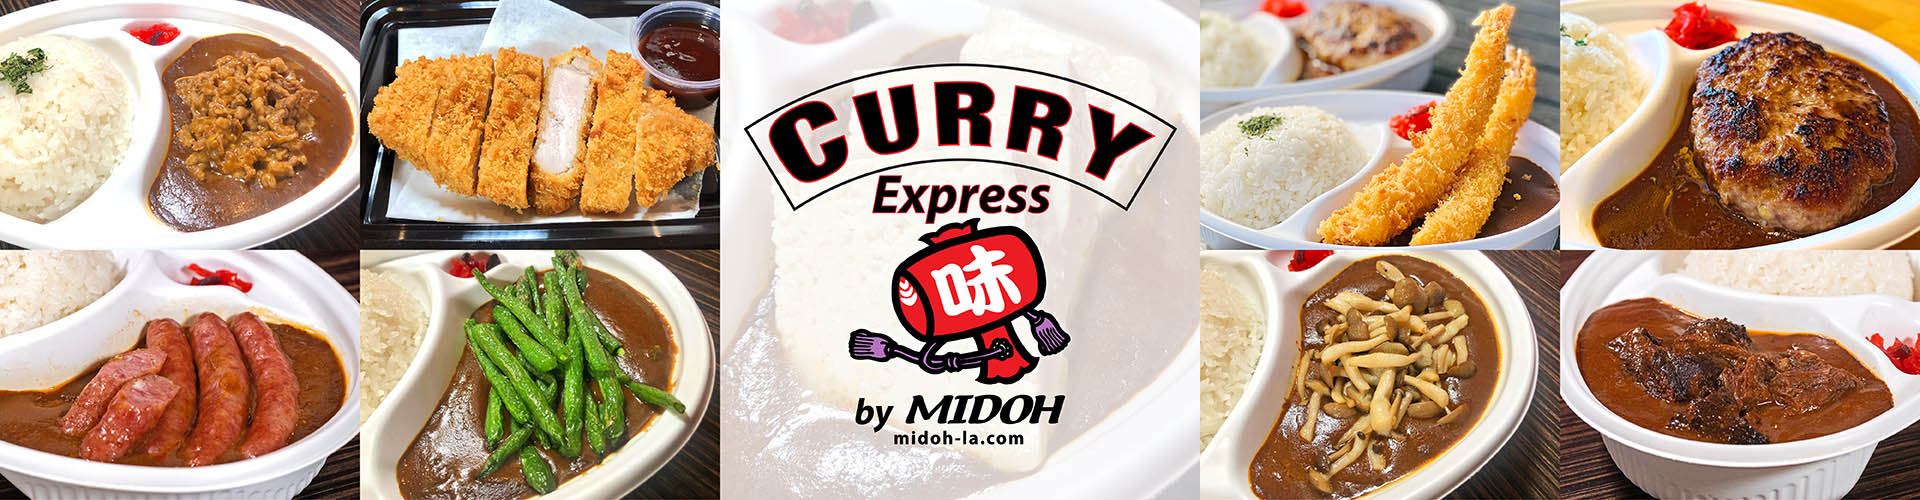 CURRY Express by MIDOH